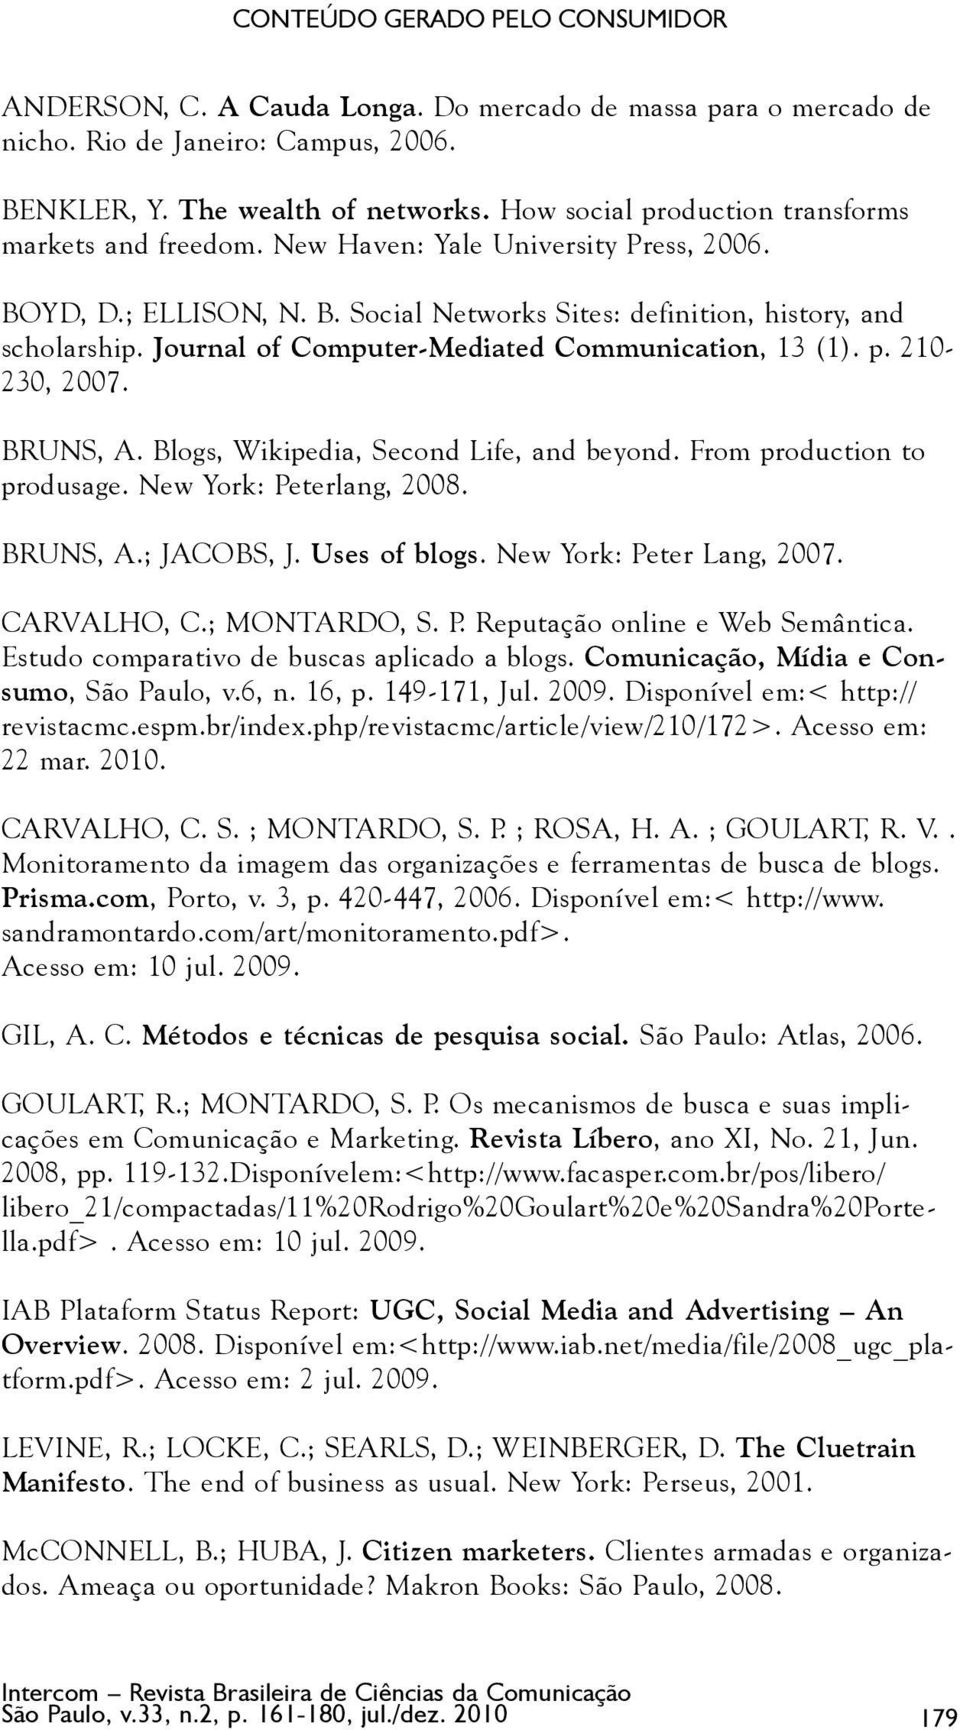 Journal of Computer-Mediated Communication, 13 (1). p. 210-230, 2007. BRUNS, A. Blogs, Wikipedia, Second Life, and beyond. From production to produsage. New York: Peterlang, 2008. BRUNS, A.; JACOBS, J.